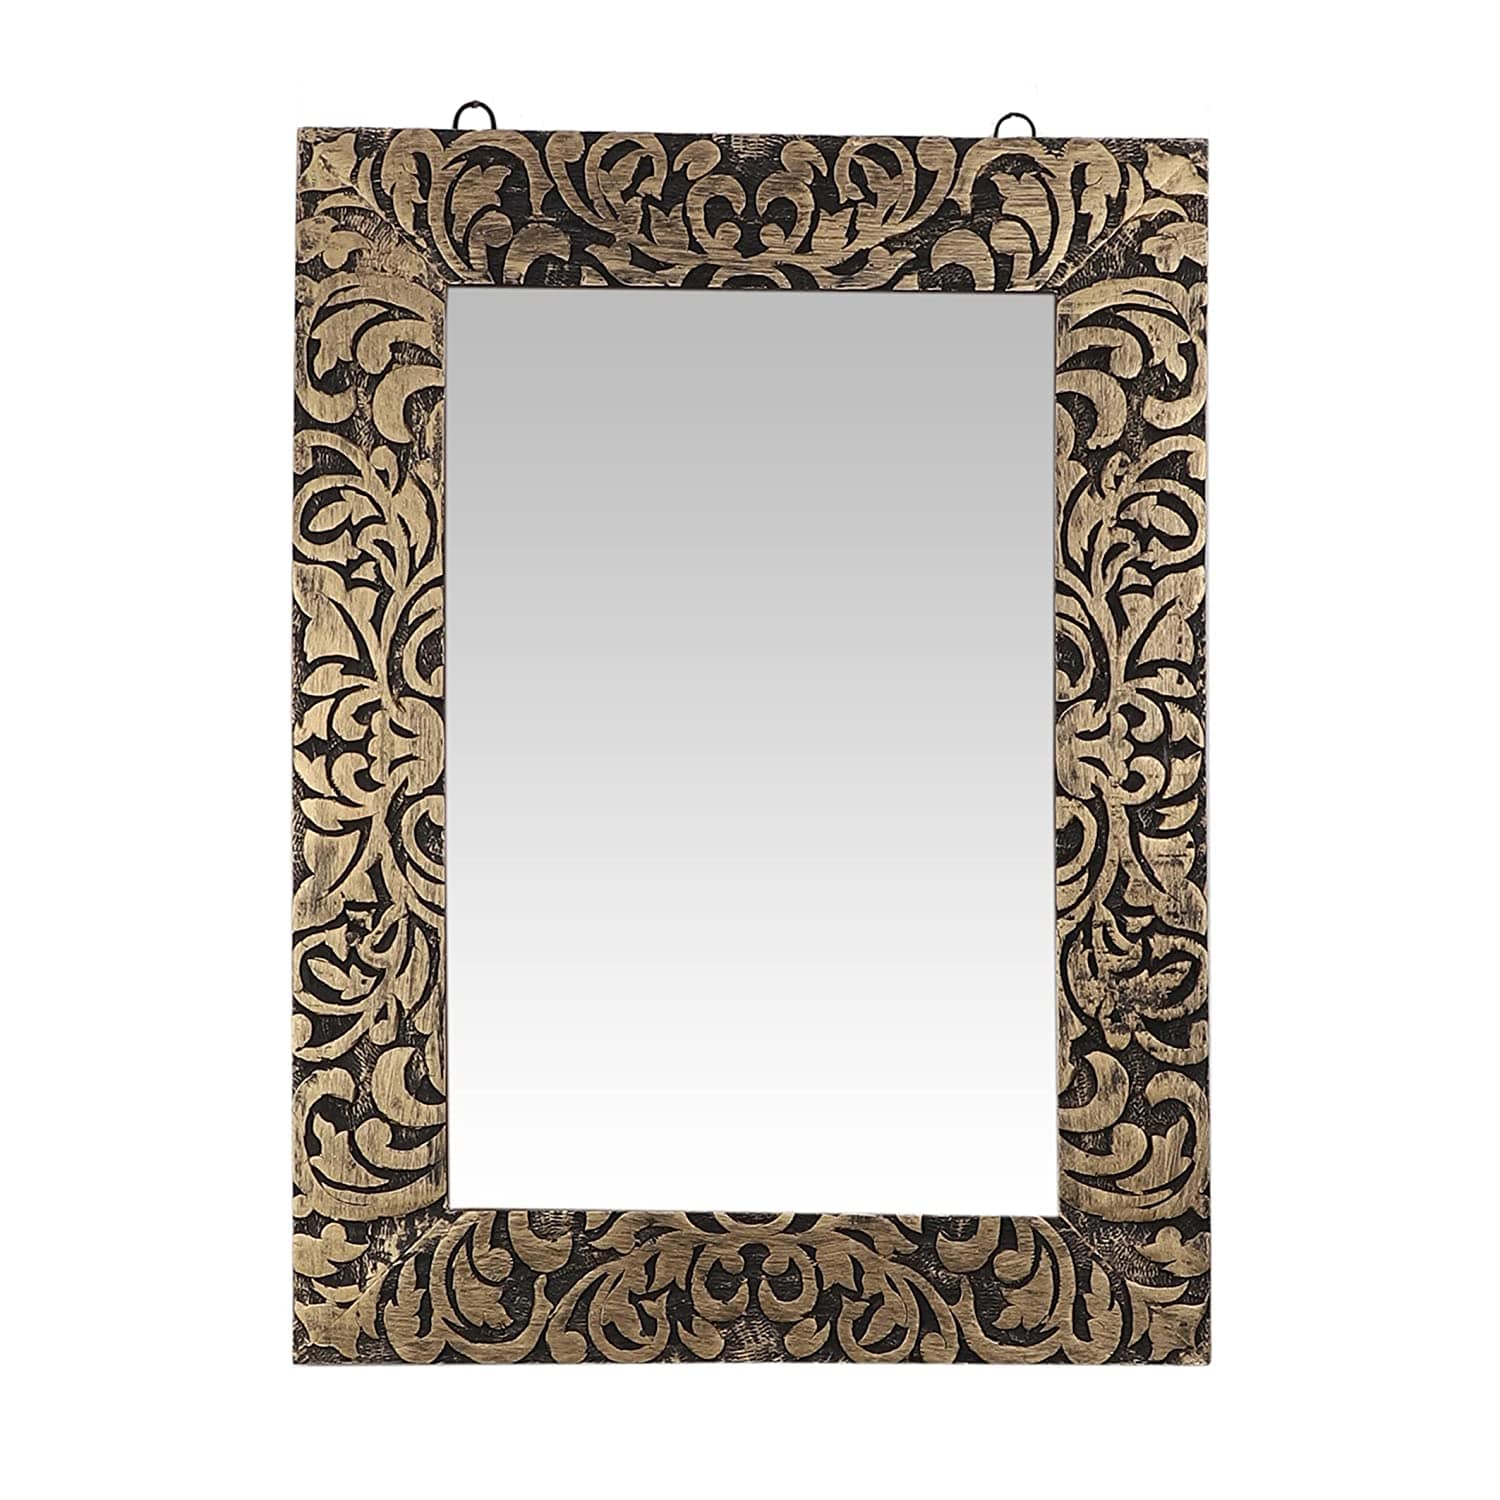 Wood Handcrafted Wall Mirror for Bedroom, Home Decor, Living Room, Bathroom, 59 X 43 2.5 Cm (Gold)